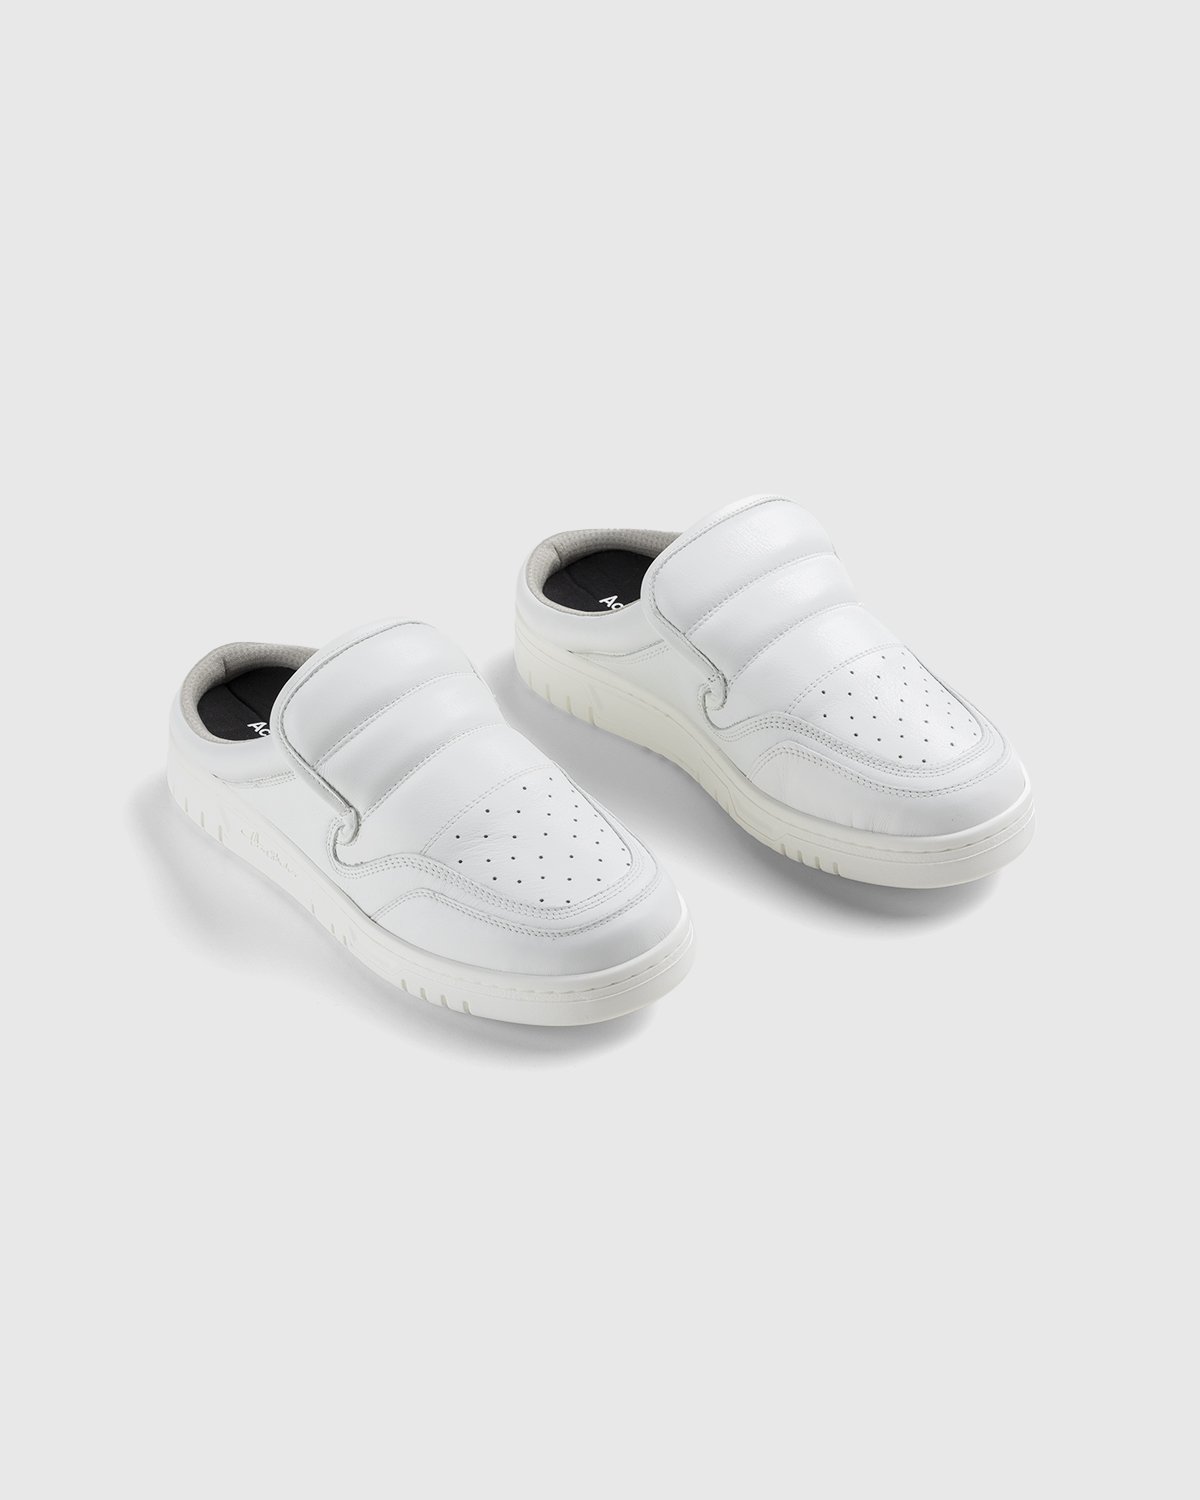 Acne Studios - Cow Leather Mule White - Footwear - White - Image 5